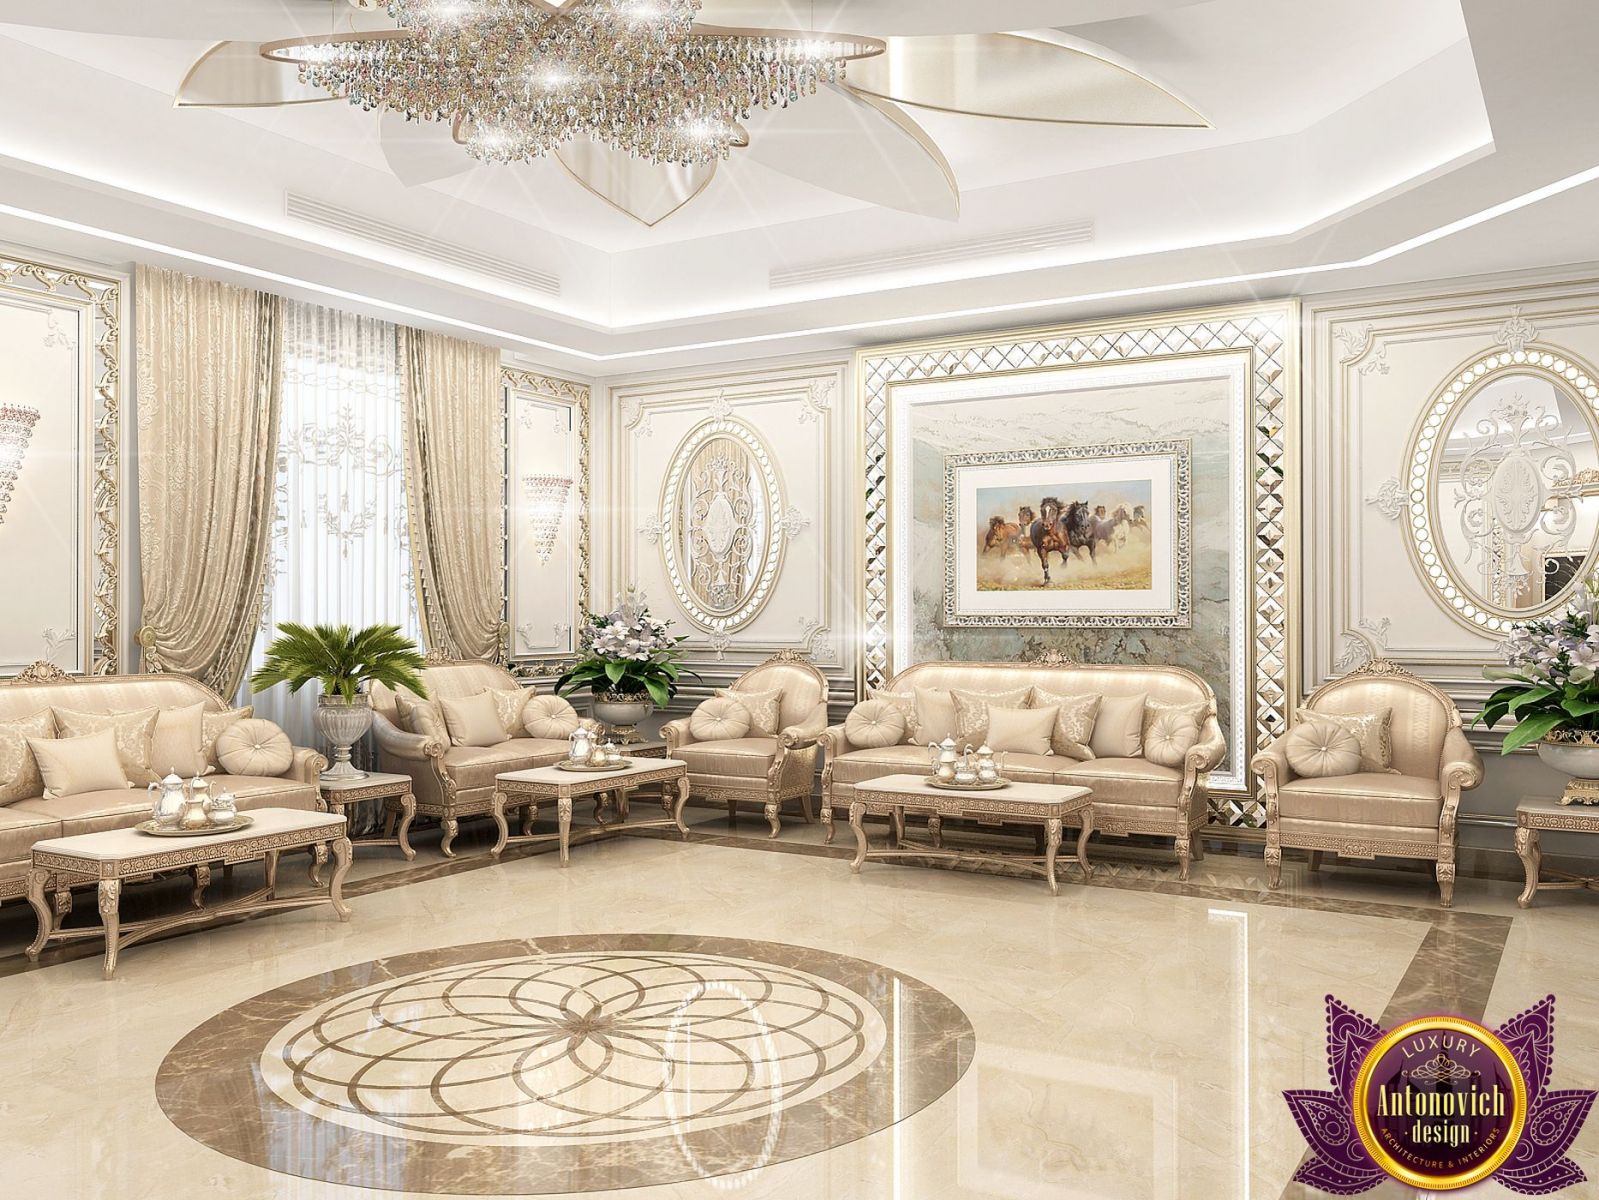 Luxurious Majlis design featuring gold accents and rich textures